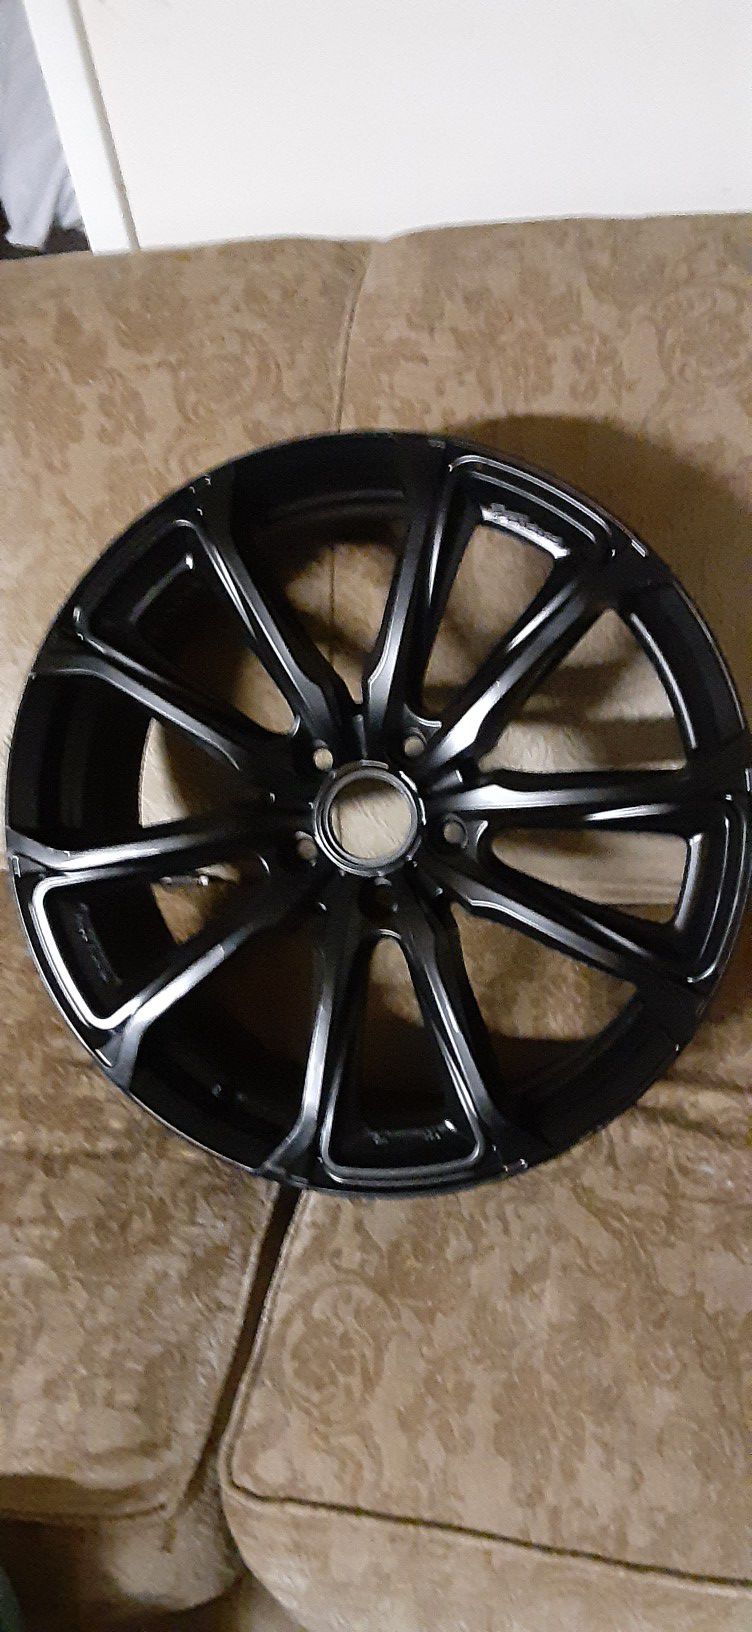 19 ×7 dodge / jeep rims practically new no scratches and never been curbed